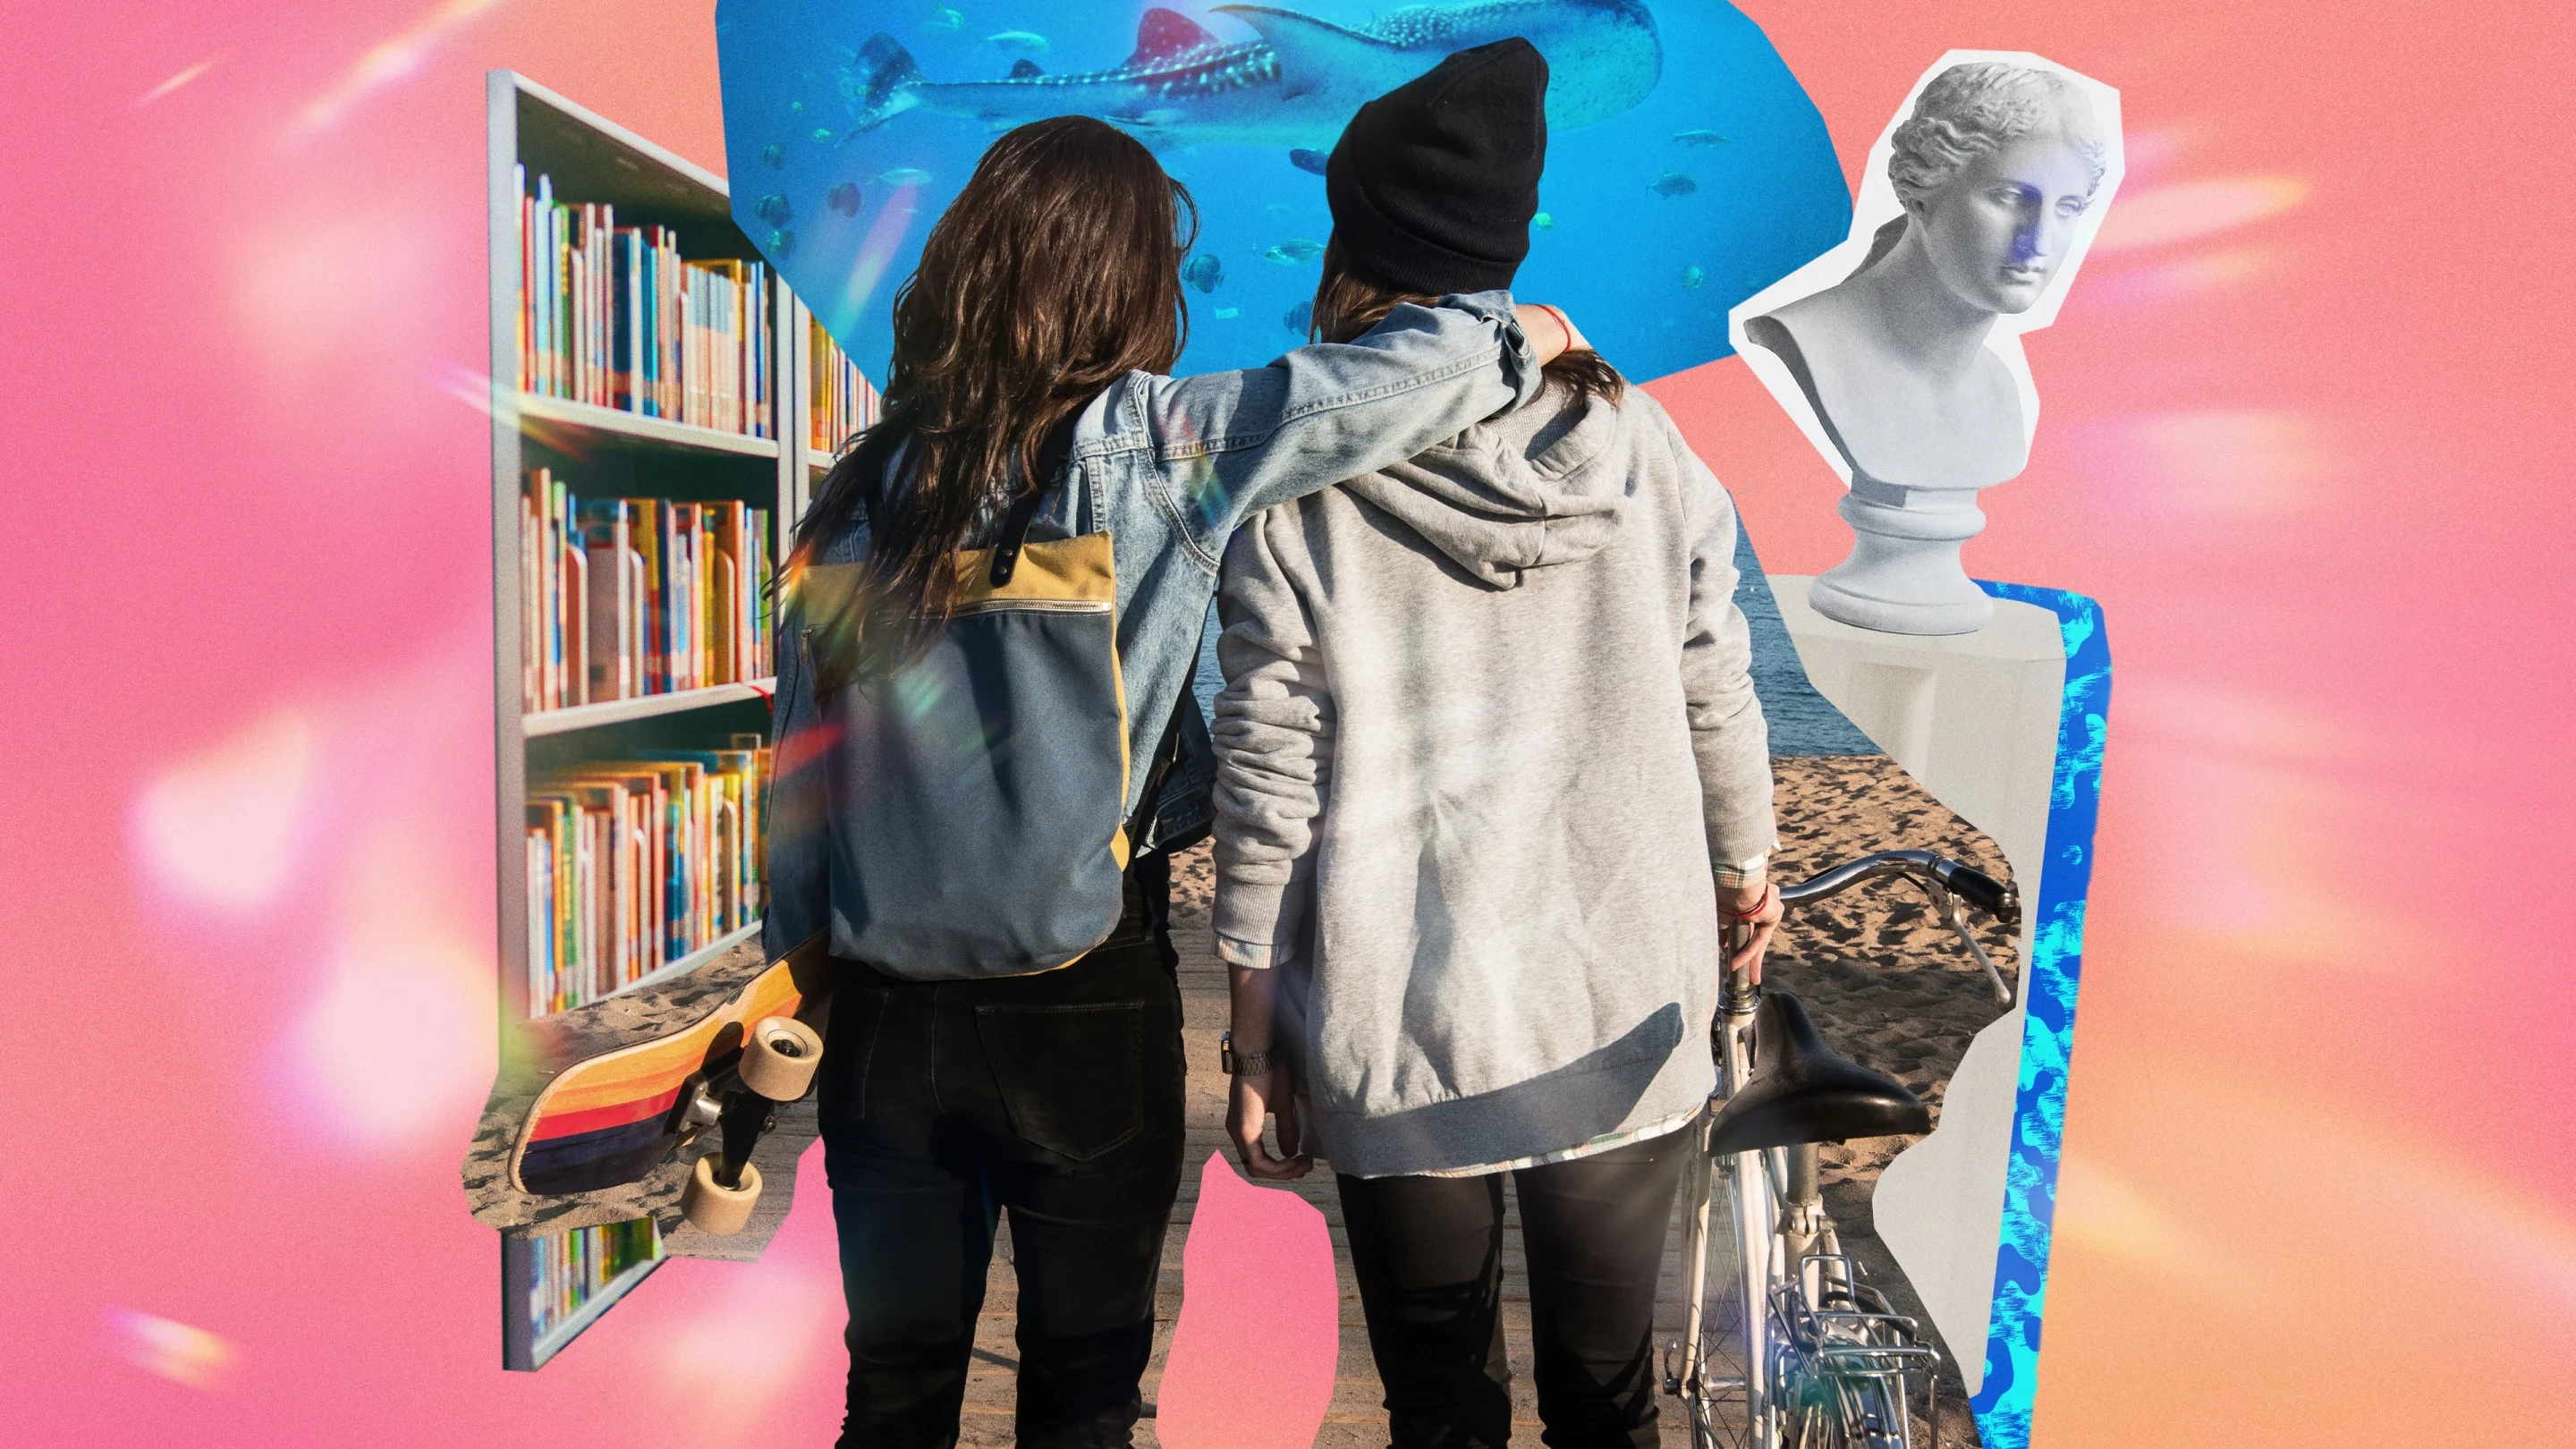 Two women have their arms around each other, with various items collaged around them including a deconstructed bookshelf, a shark in an aquarium and an art bust.